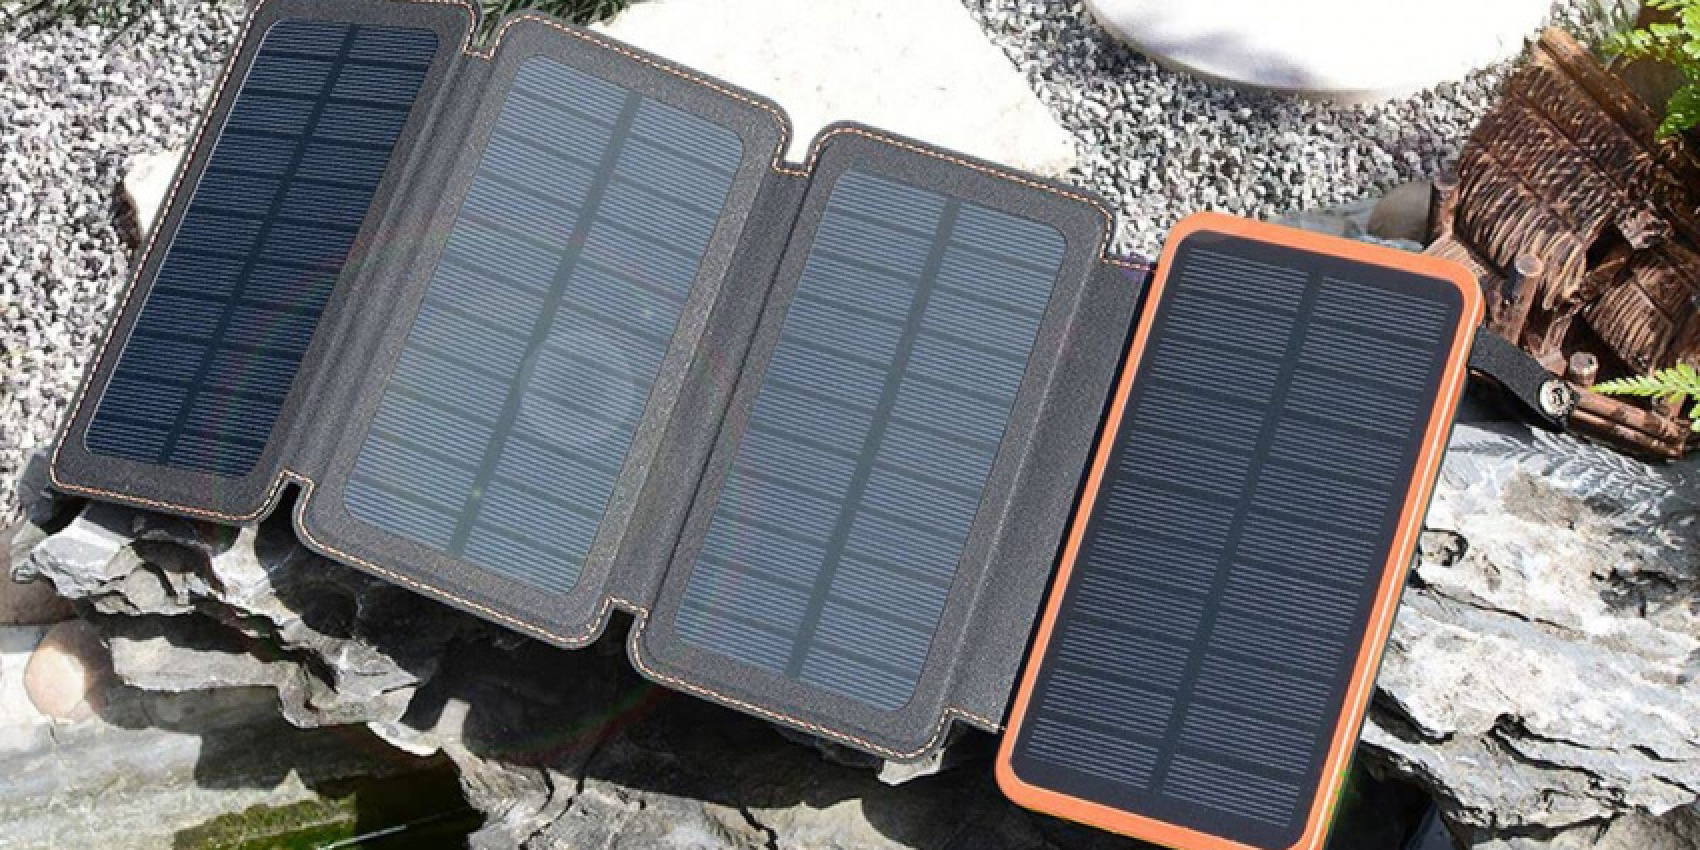 autos, cars, amazon, black friday, be prepared for anything with a solar-powered portable battery for $40, more in new green deals